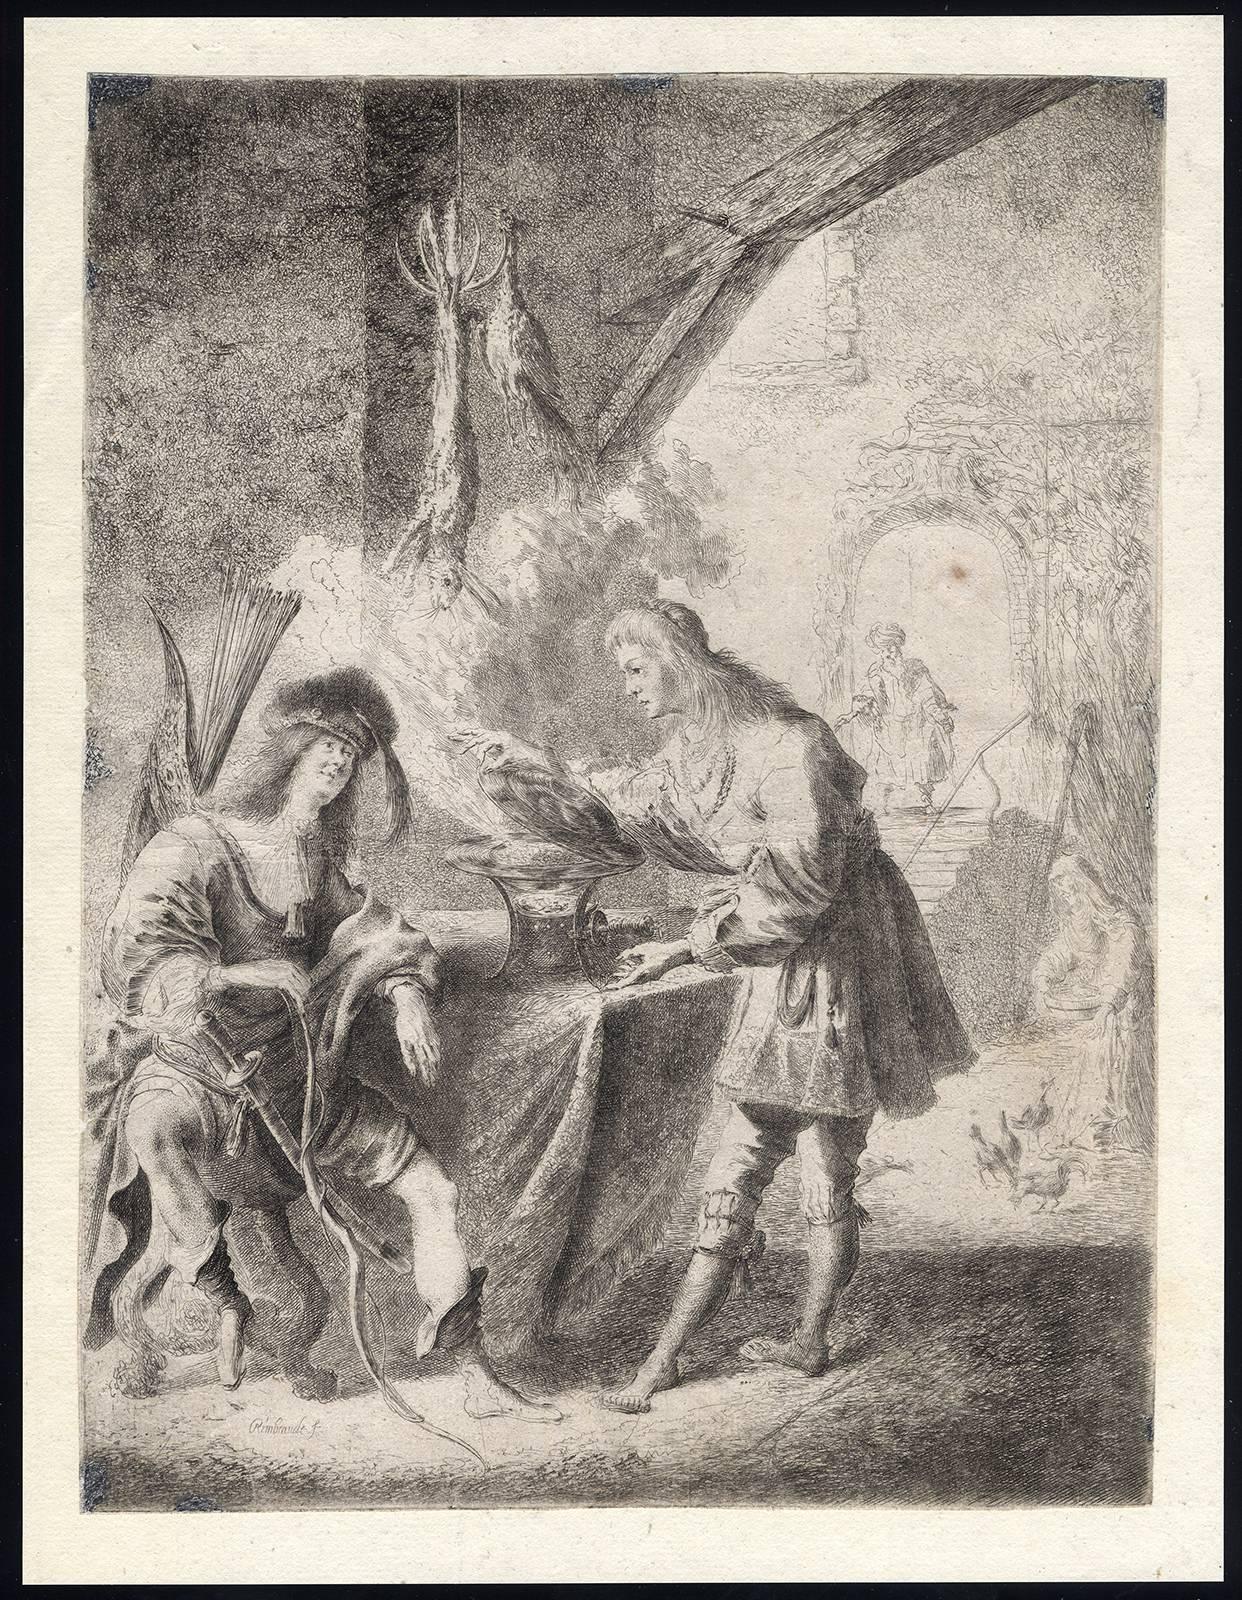 Peter Rottermondt Figurative Print - Untitled - Esau selling his birthright to Jacob.